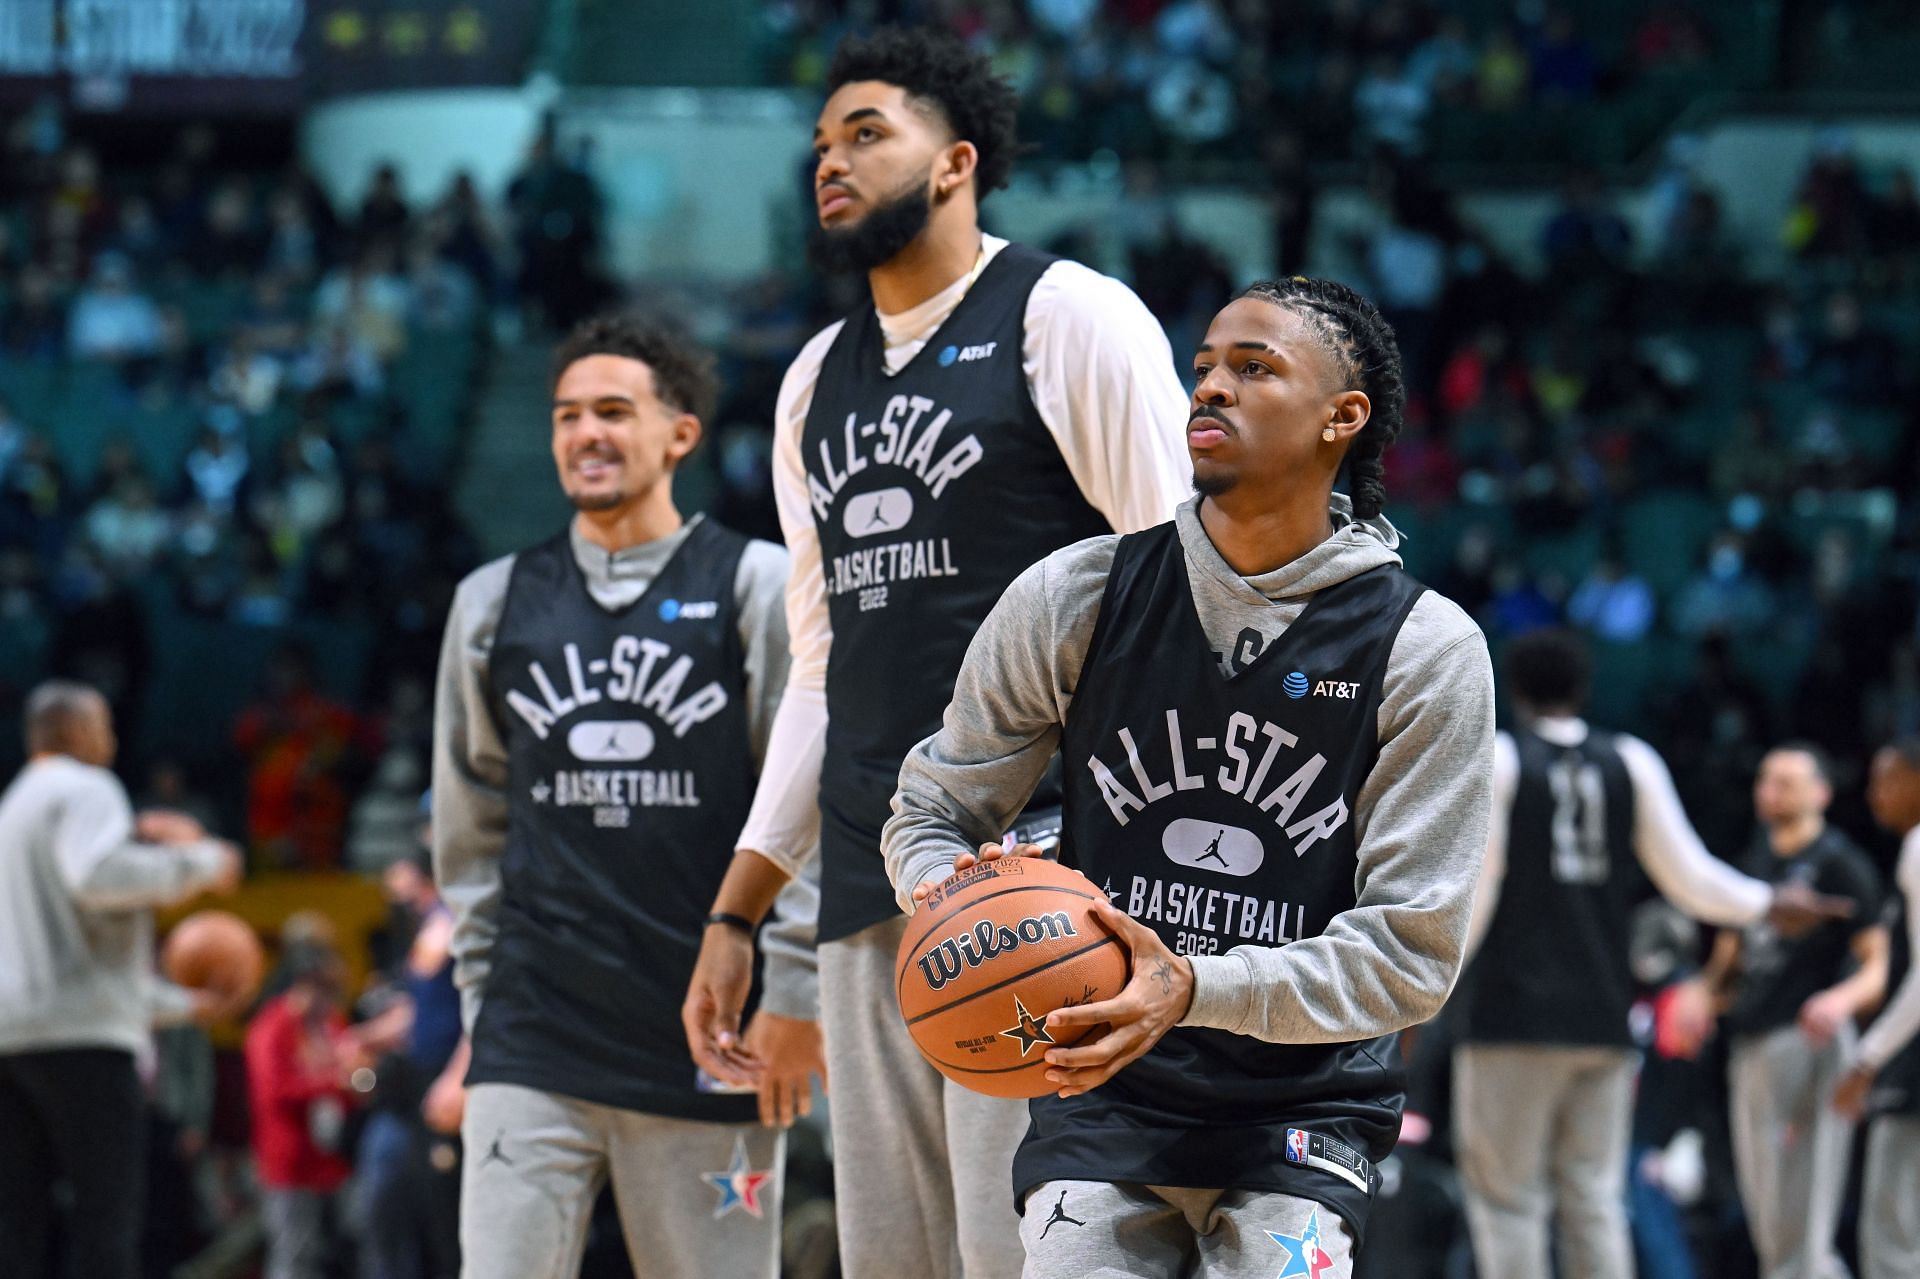 The Minnesota Timberwolves&#039; Karl-Anthony Towns and the Memphis Grizzlies&#039; Ja Morant played as teammates for Team Durant during the 2022 NBA All-Star game.